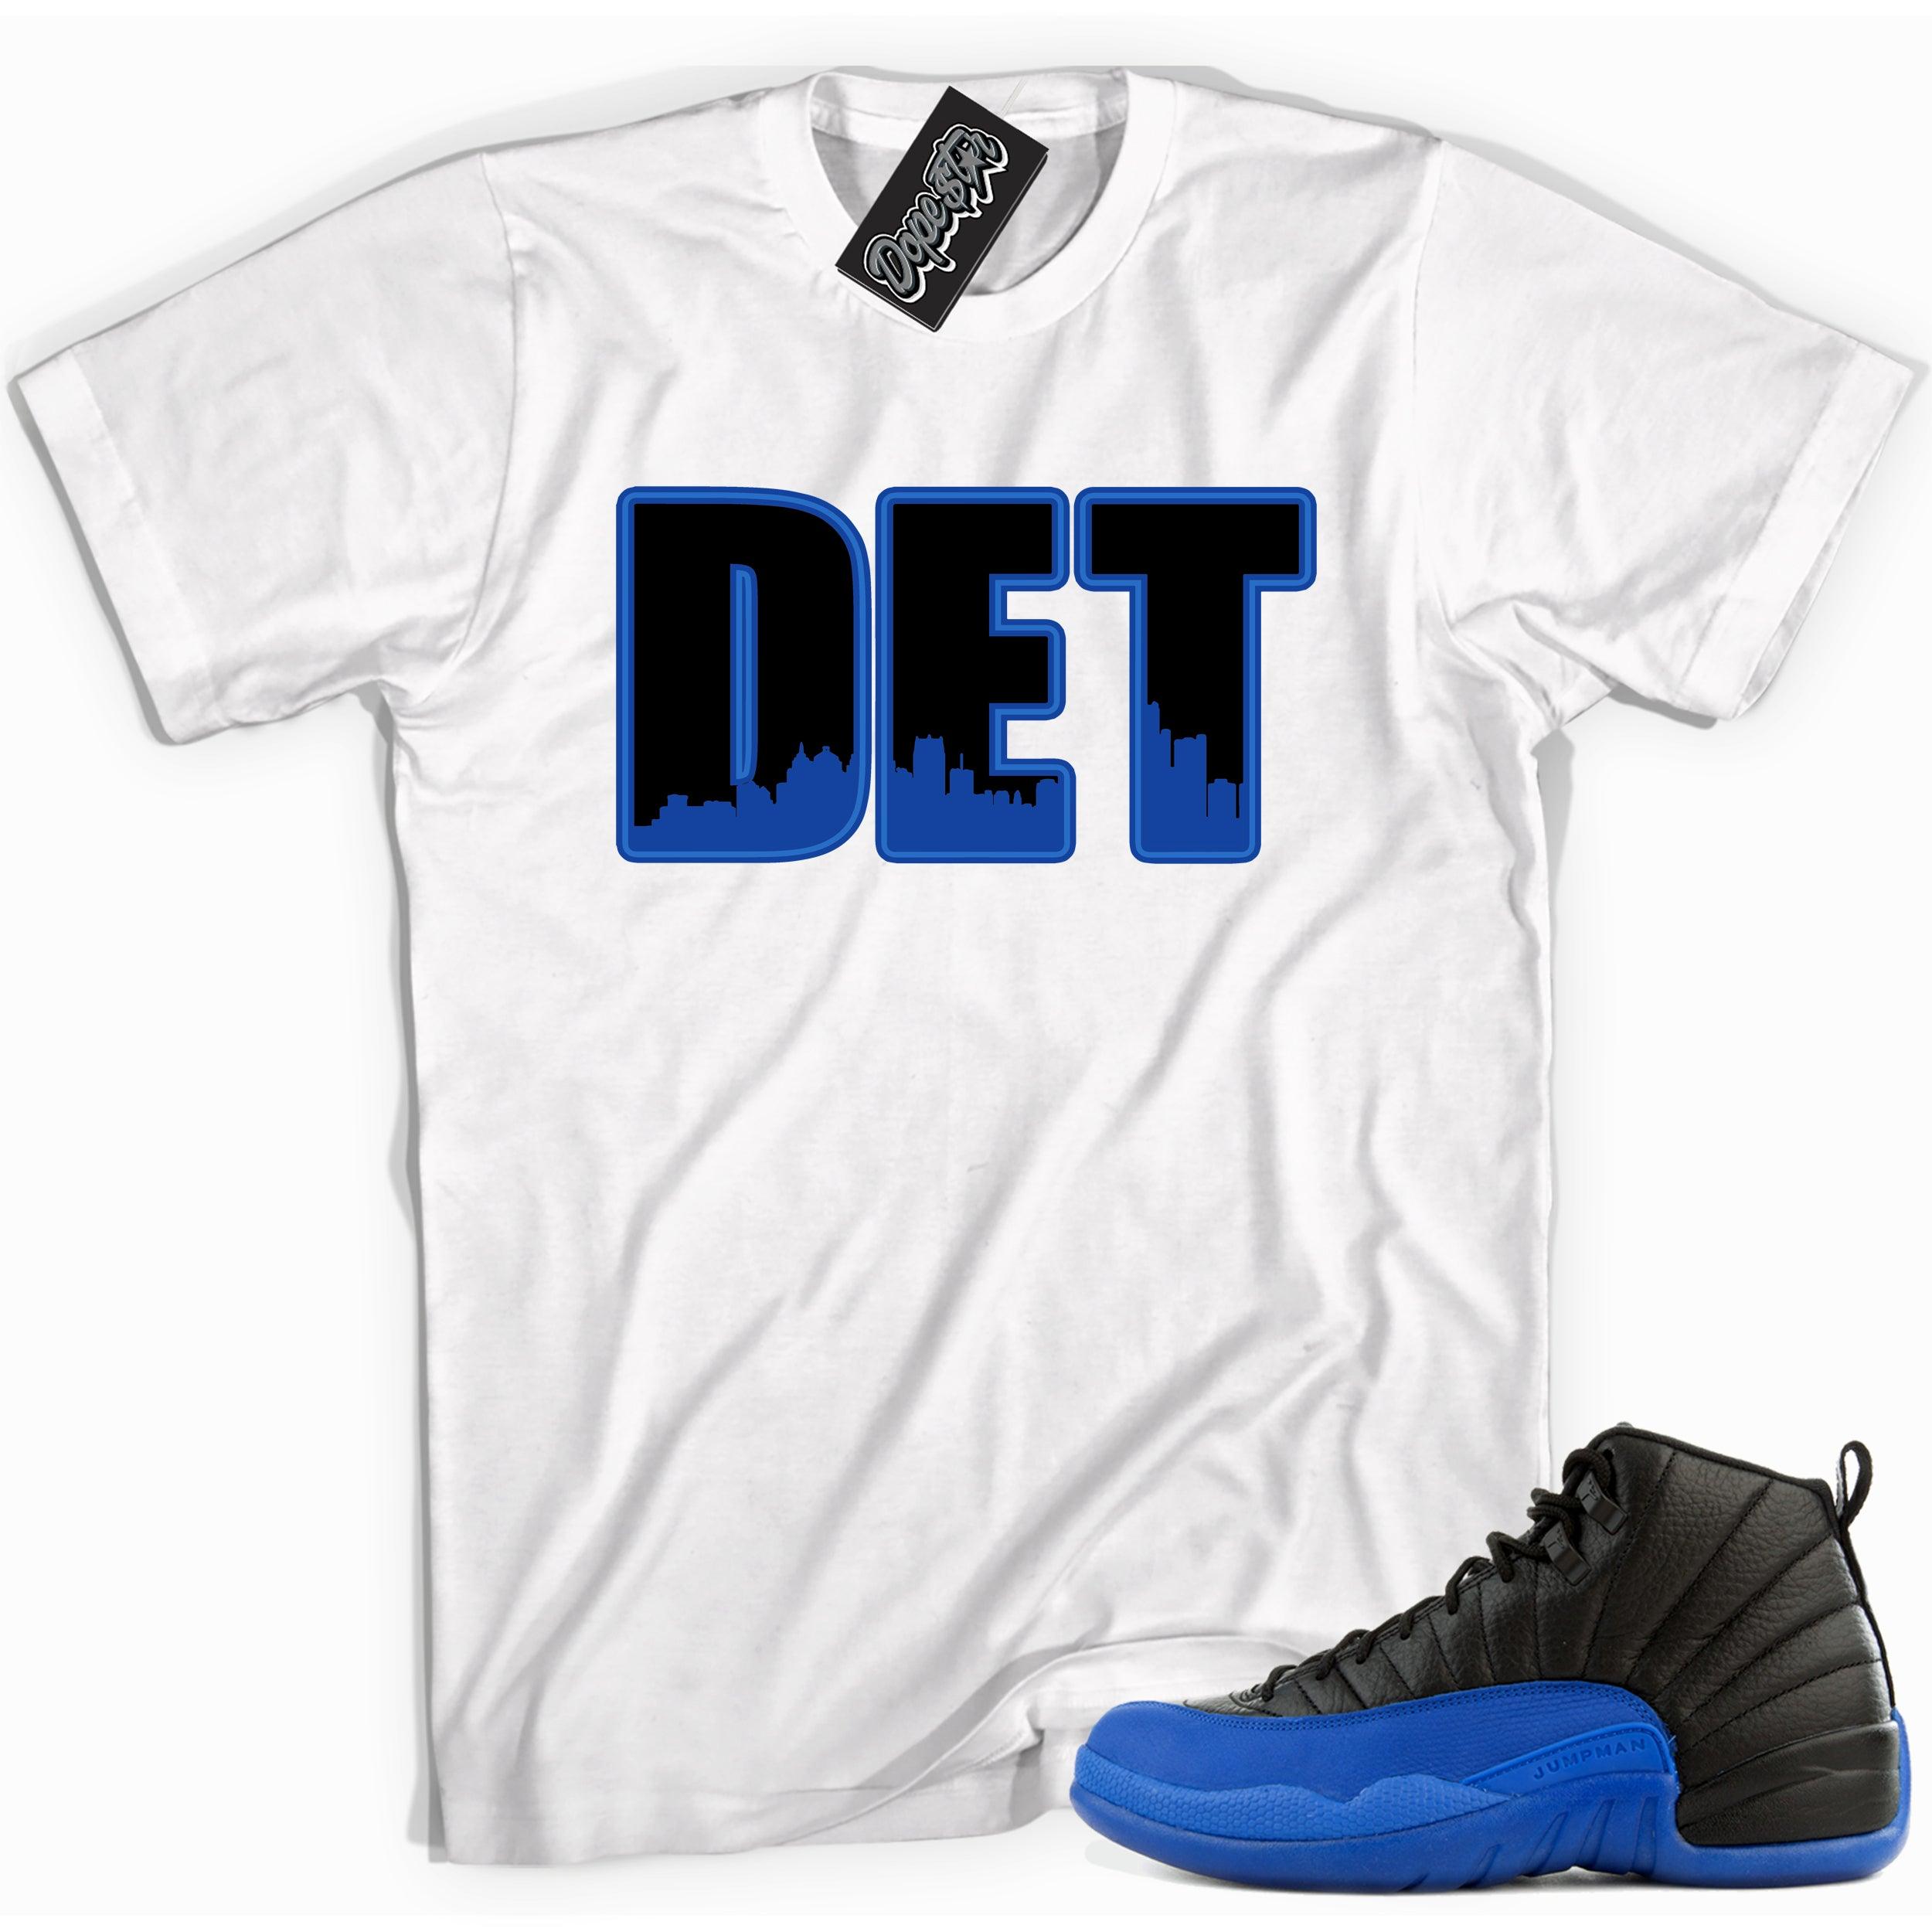 Cool white graphic tee with 'det' print, that perfectly matches Air Jordan 12 Retro Black Game Royal sneakers.